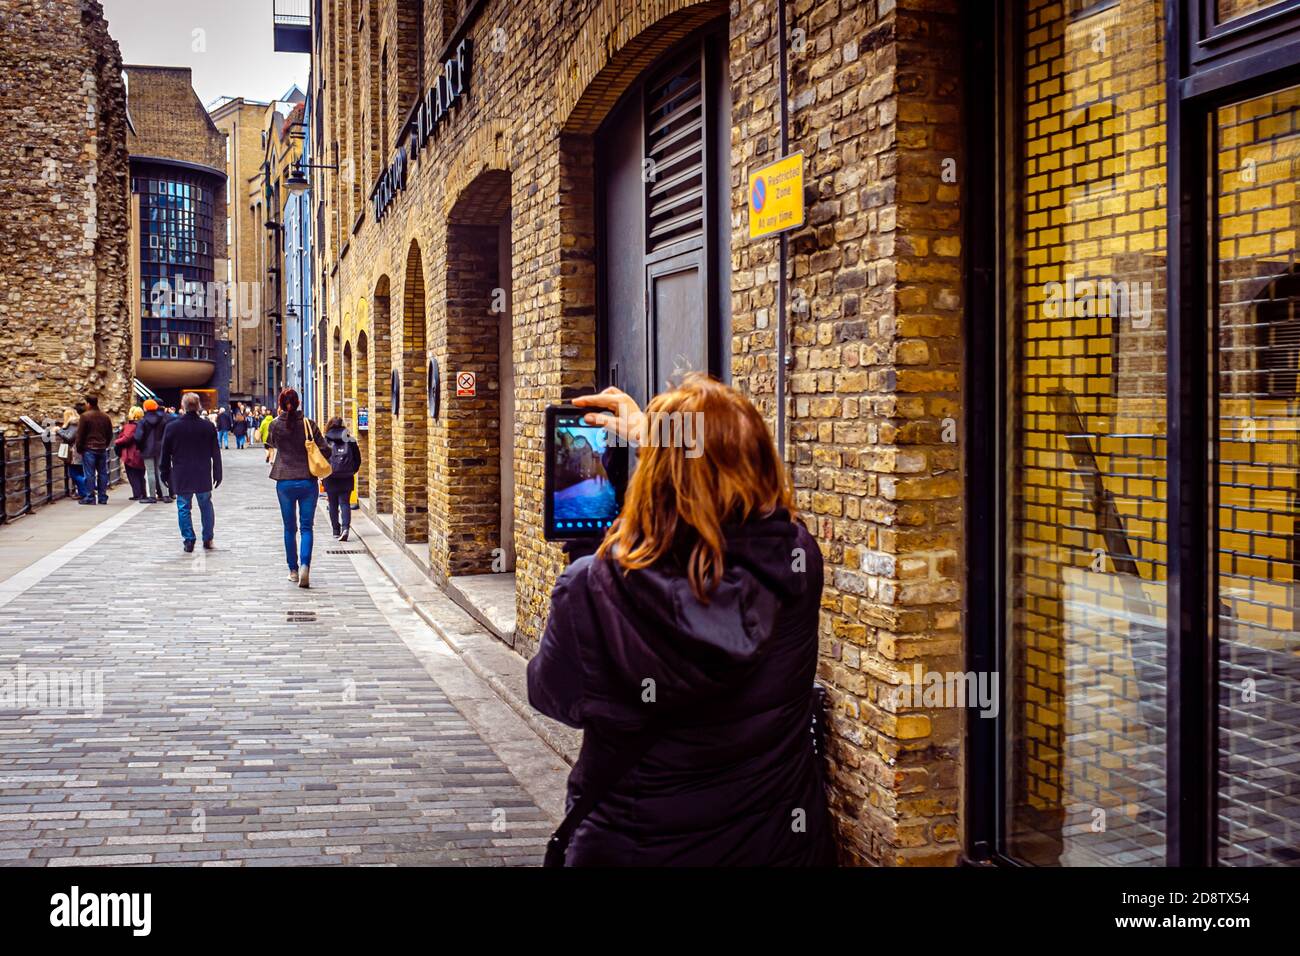 London, UK, December 7, 2013: woman is taking a photo of passersby near Clink Street, Pickfords Wharf Stock Photo